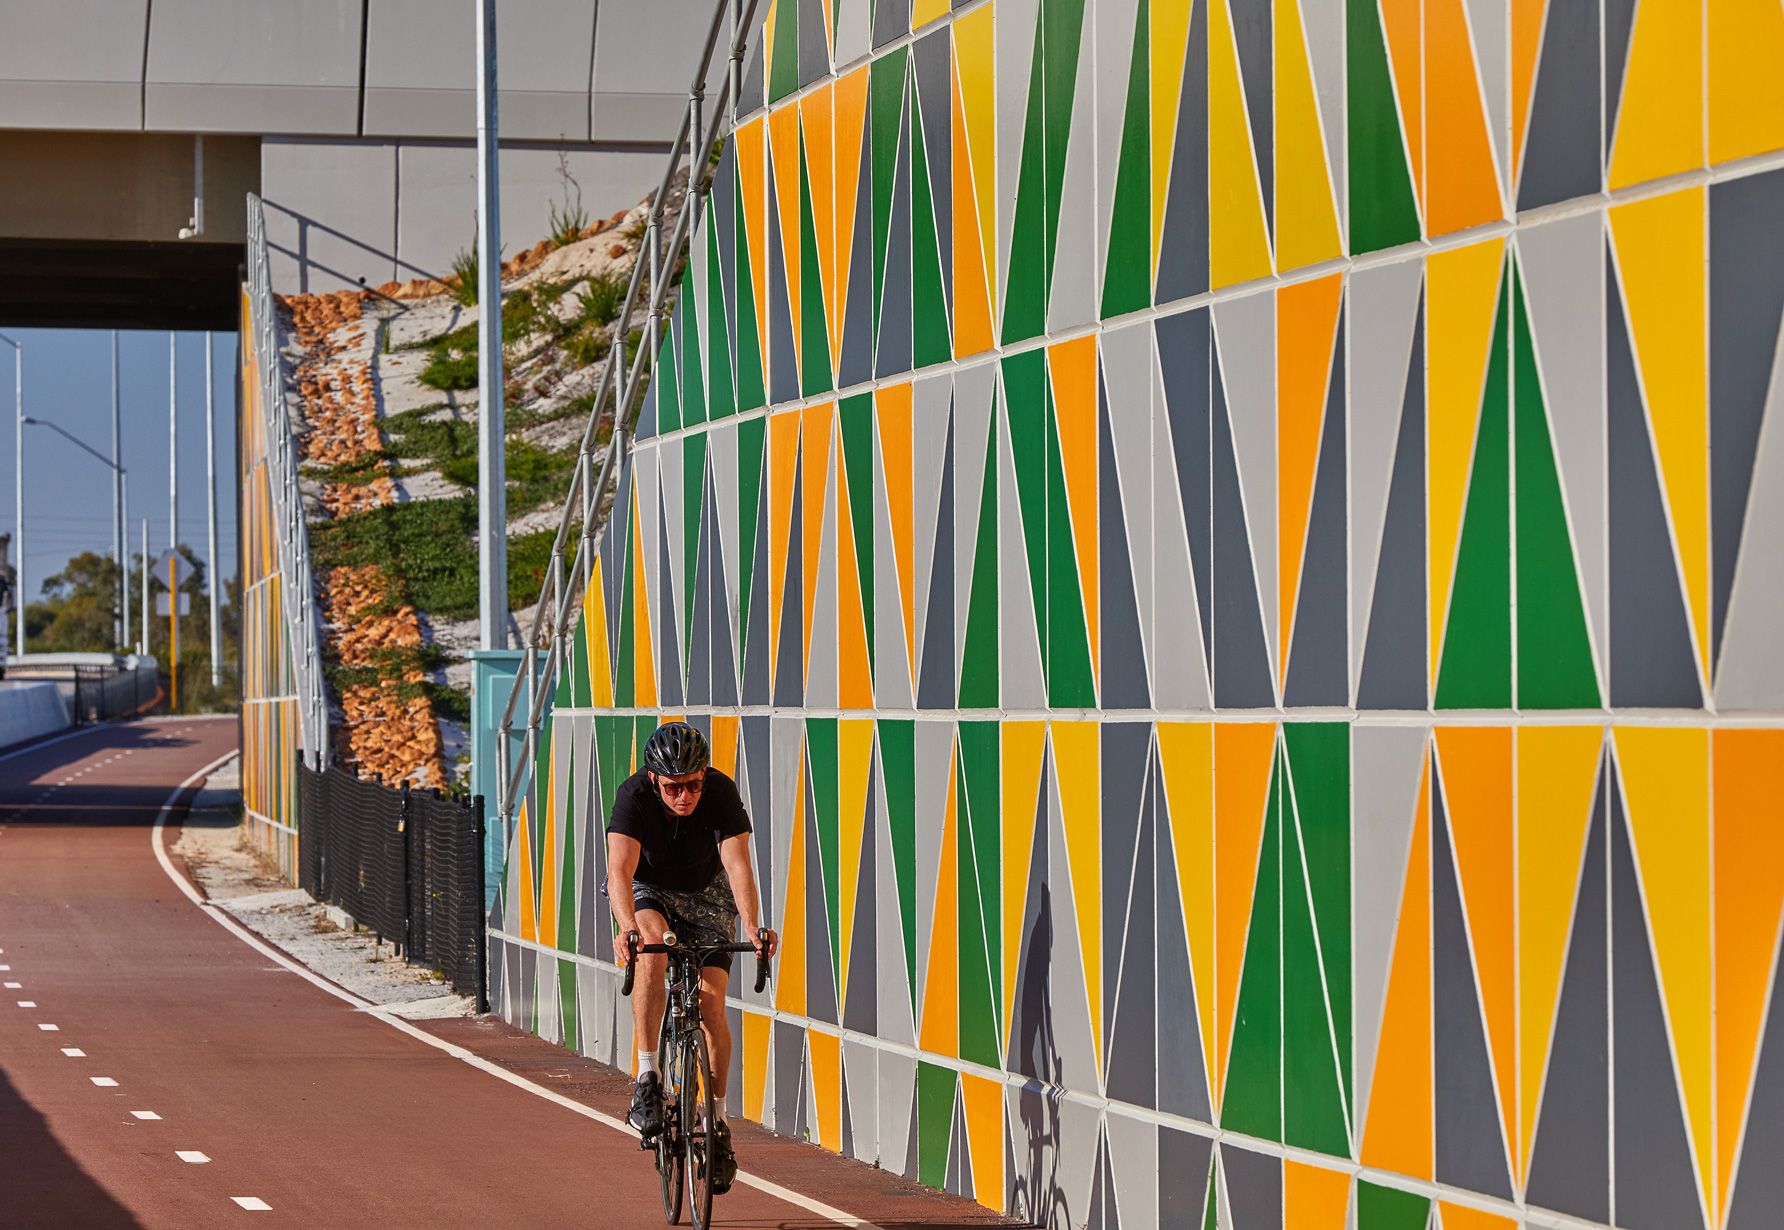 A Reinforced Earth retaining precast concrete wall at Toking Highway, Western Australia, with a colourful modular facing panel. Bicycle rider riding on the cycle path in front of the wall.